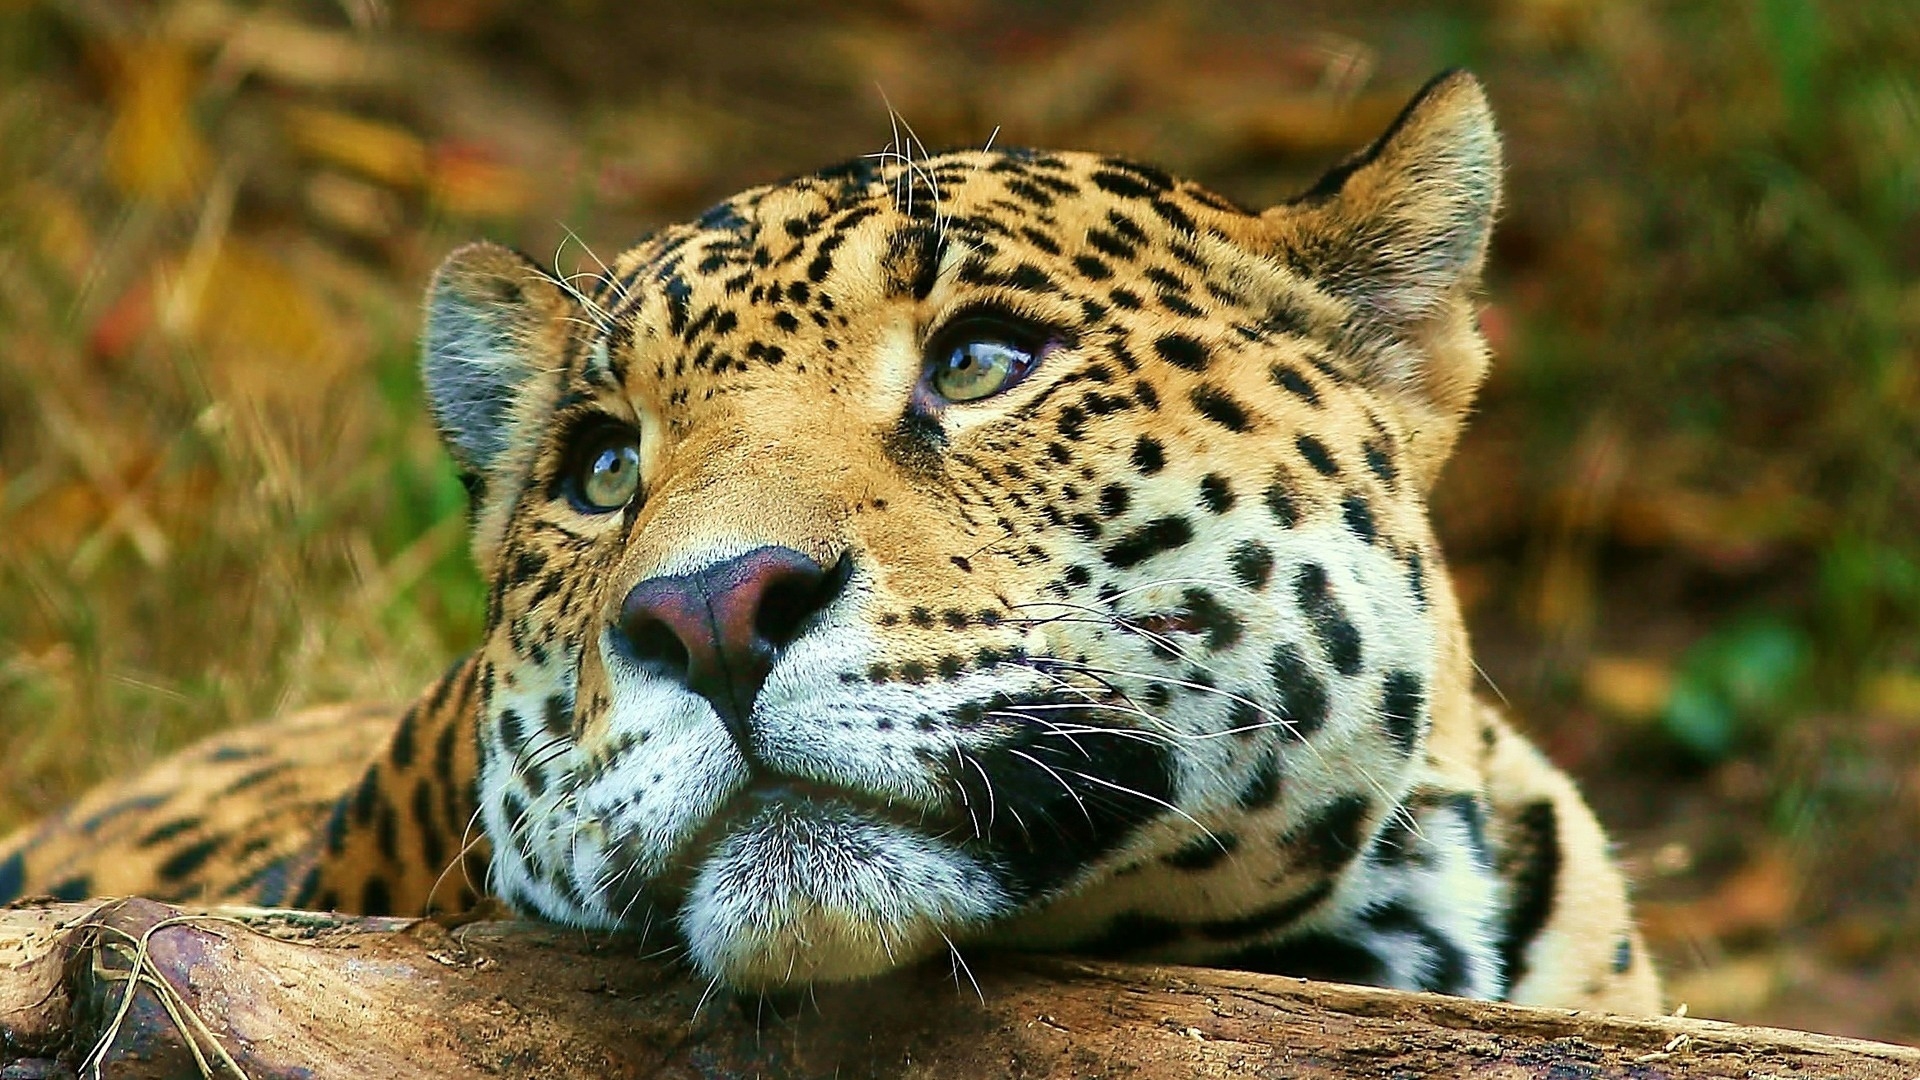 Leopard dreaming for 1920 x 1080 HDTV 1080p resolution